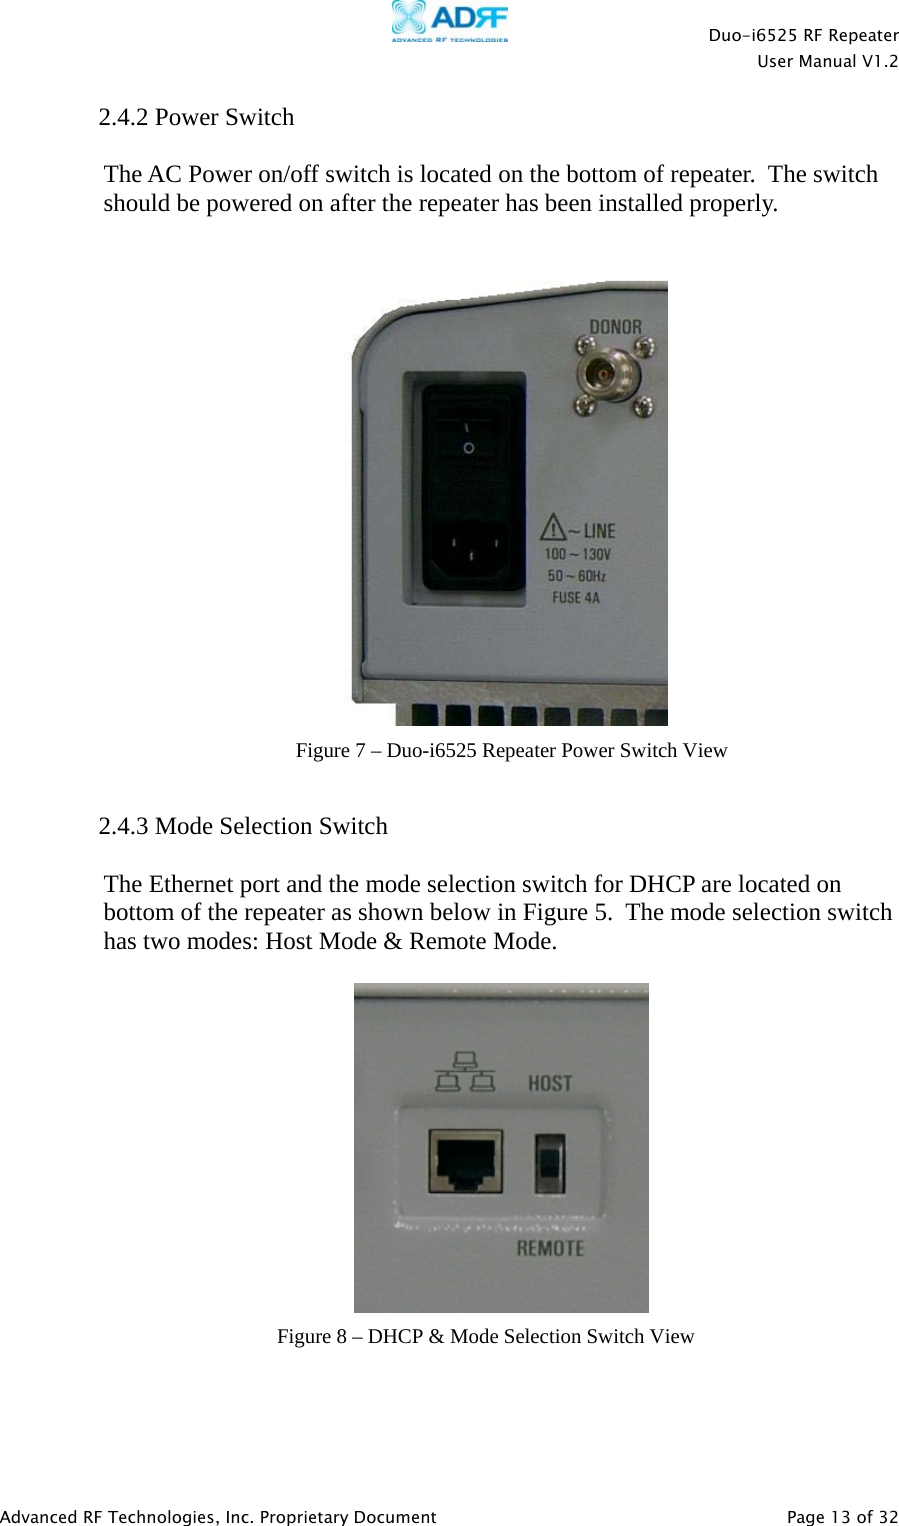    Duo-i6525 RF Repeater  User Manual V1.2  Advanced RF Technologies, Inc. Proprietary Document   Page 13 of 32  2.4.2 Power Switch  The AC Power on/off switch is located on the bottom of repeater.  The switch should be powered on after the repeater has been installed properly.      2.4.3 Mode Selection Switch   The Ethernet port and the mode selection switch for DHCP are located on bottom of the repeater as shown below in Figure 5.  The mode selection switch has two modes: Host Mode &amp; Remote Mode.       Figure 7 – Duo-i6525 Repeater Power Switch View Figure 8 – DHCP &amp; Mode Selection Switch View 